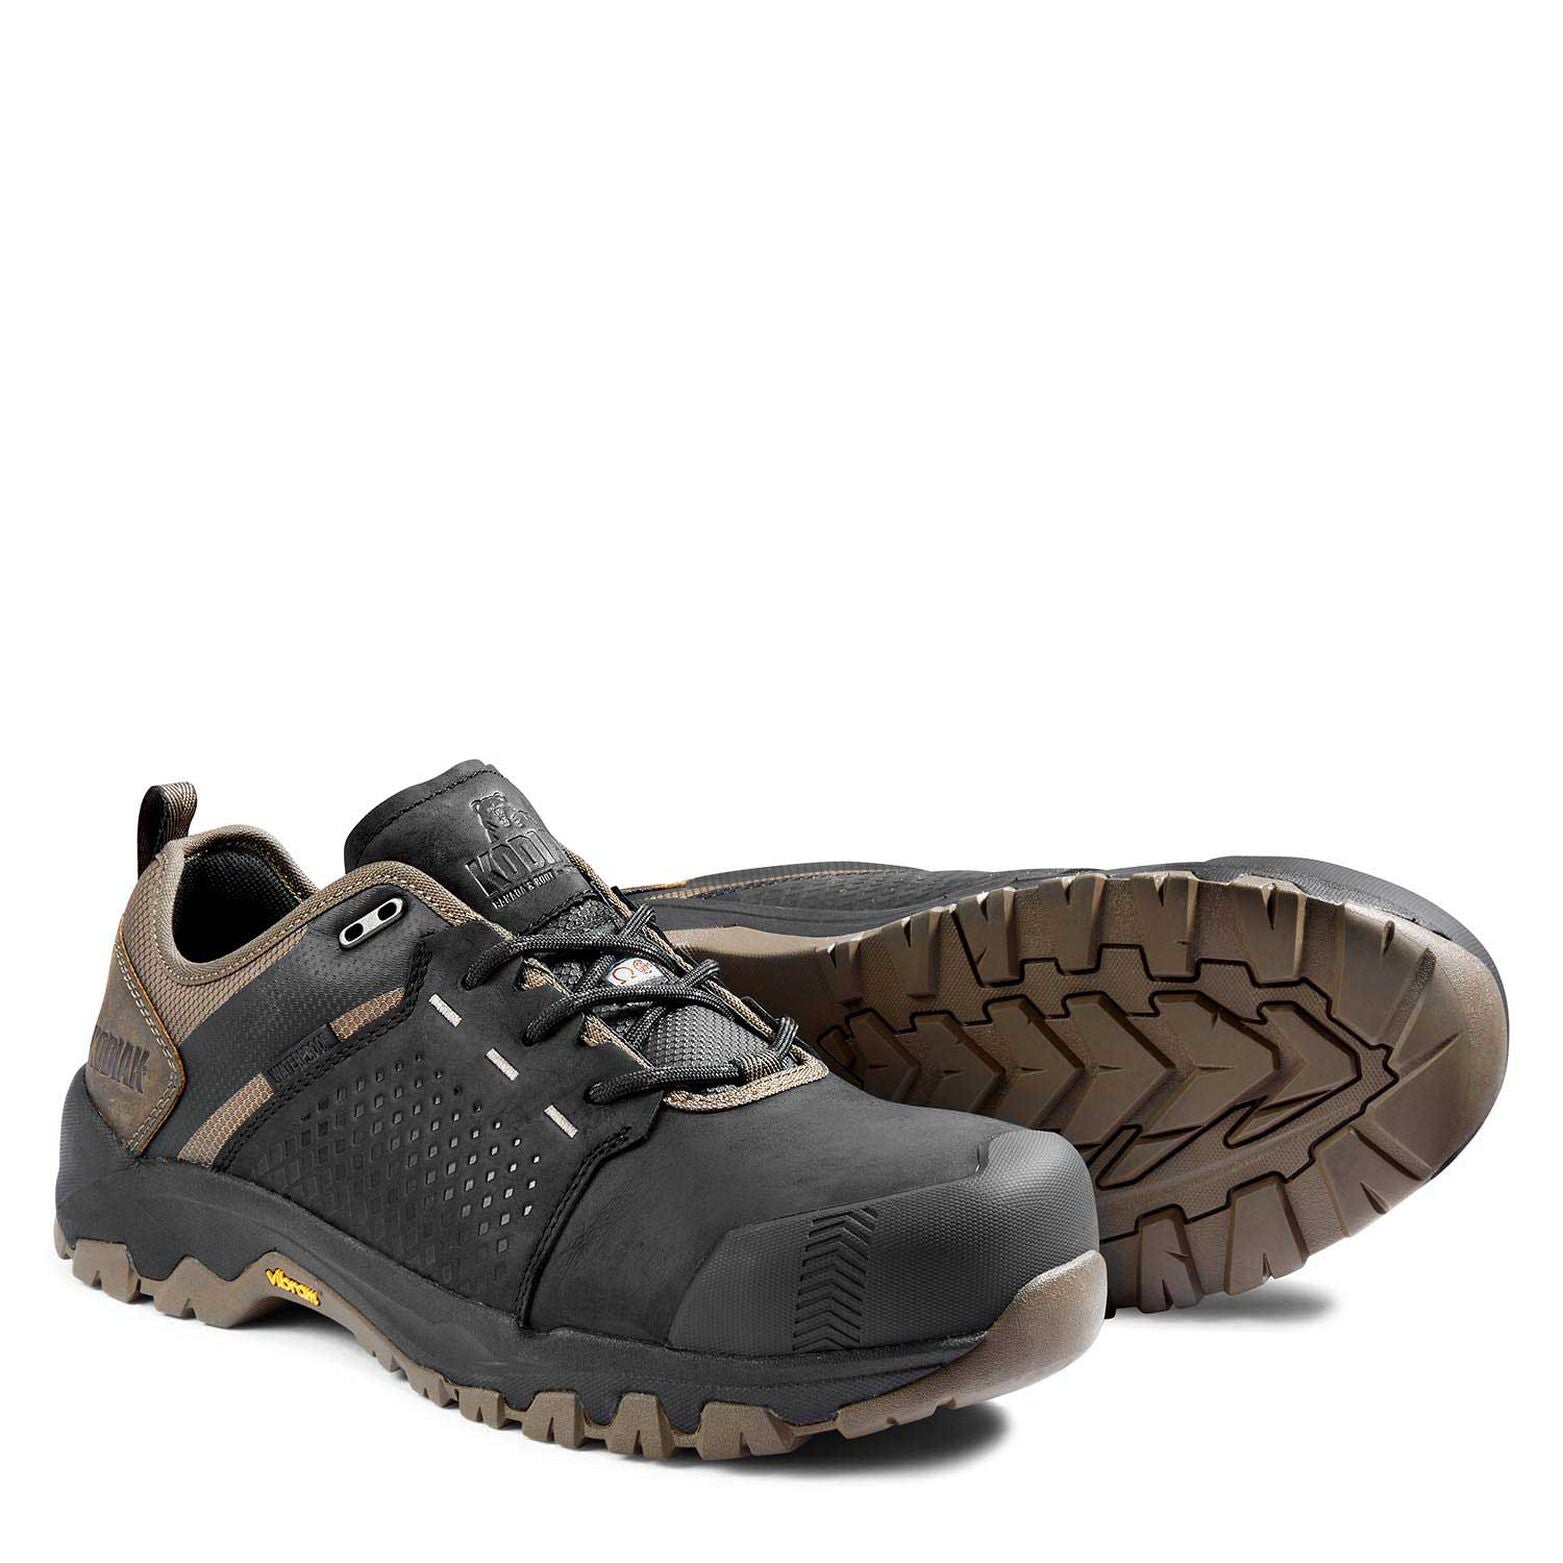 Kodiak Men's Safety Work Shoe Quest Full Grain Leather Hiker Waterproof with Composite Toe and Vibram® TC4+ Outsole